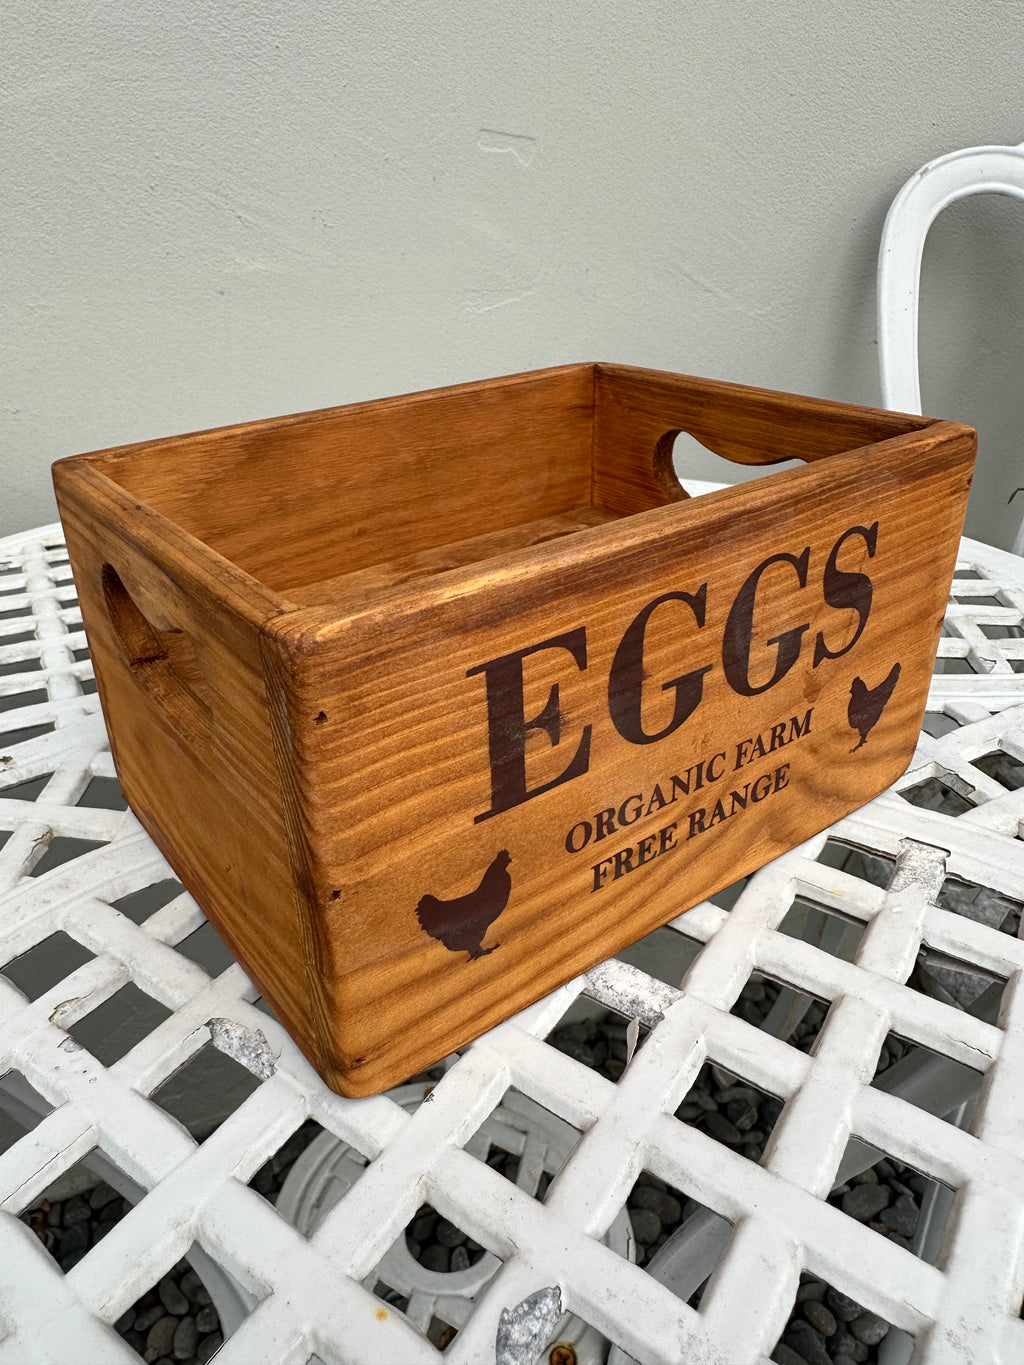 Egg & Chicken Natural 6pce wooden Tray